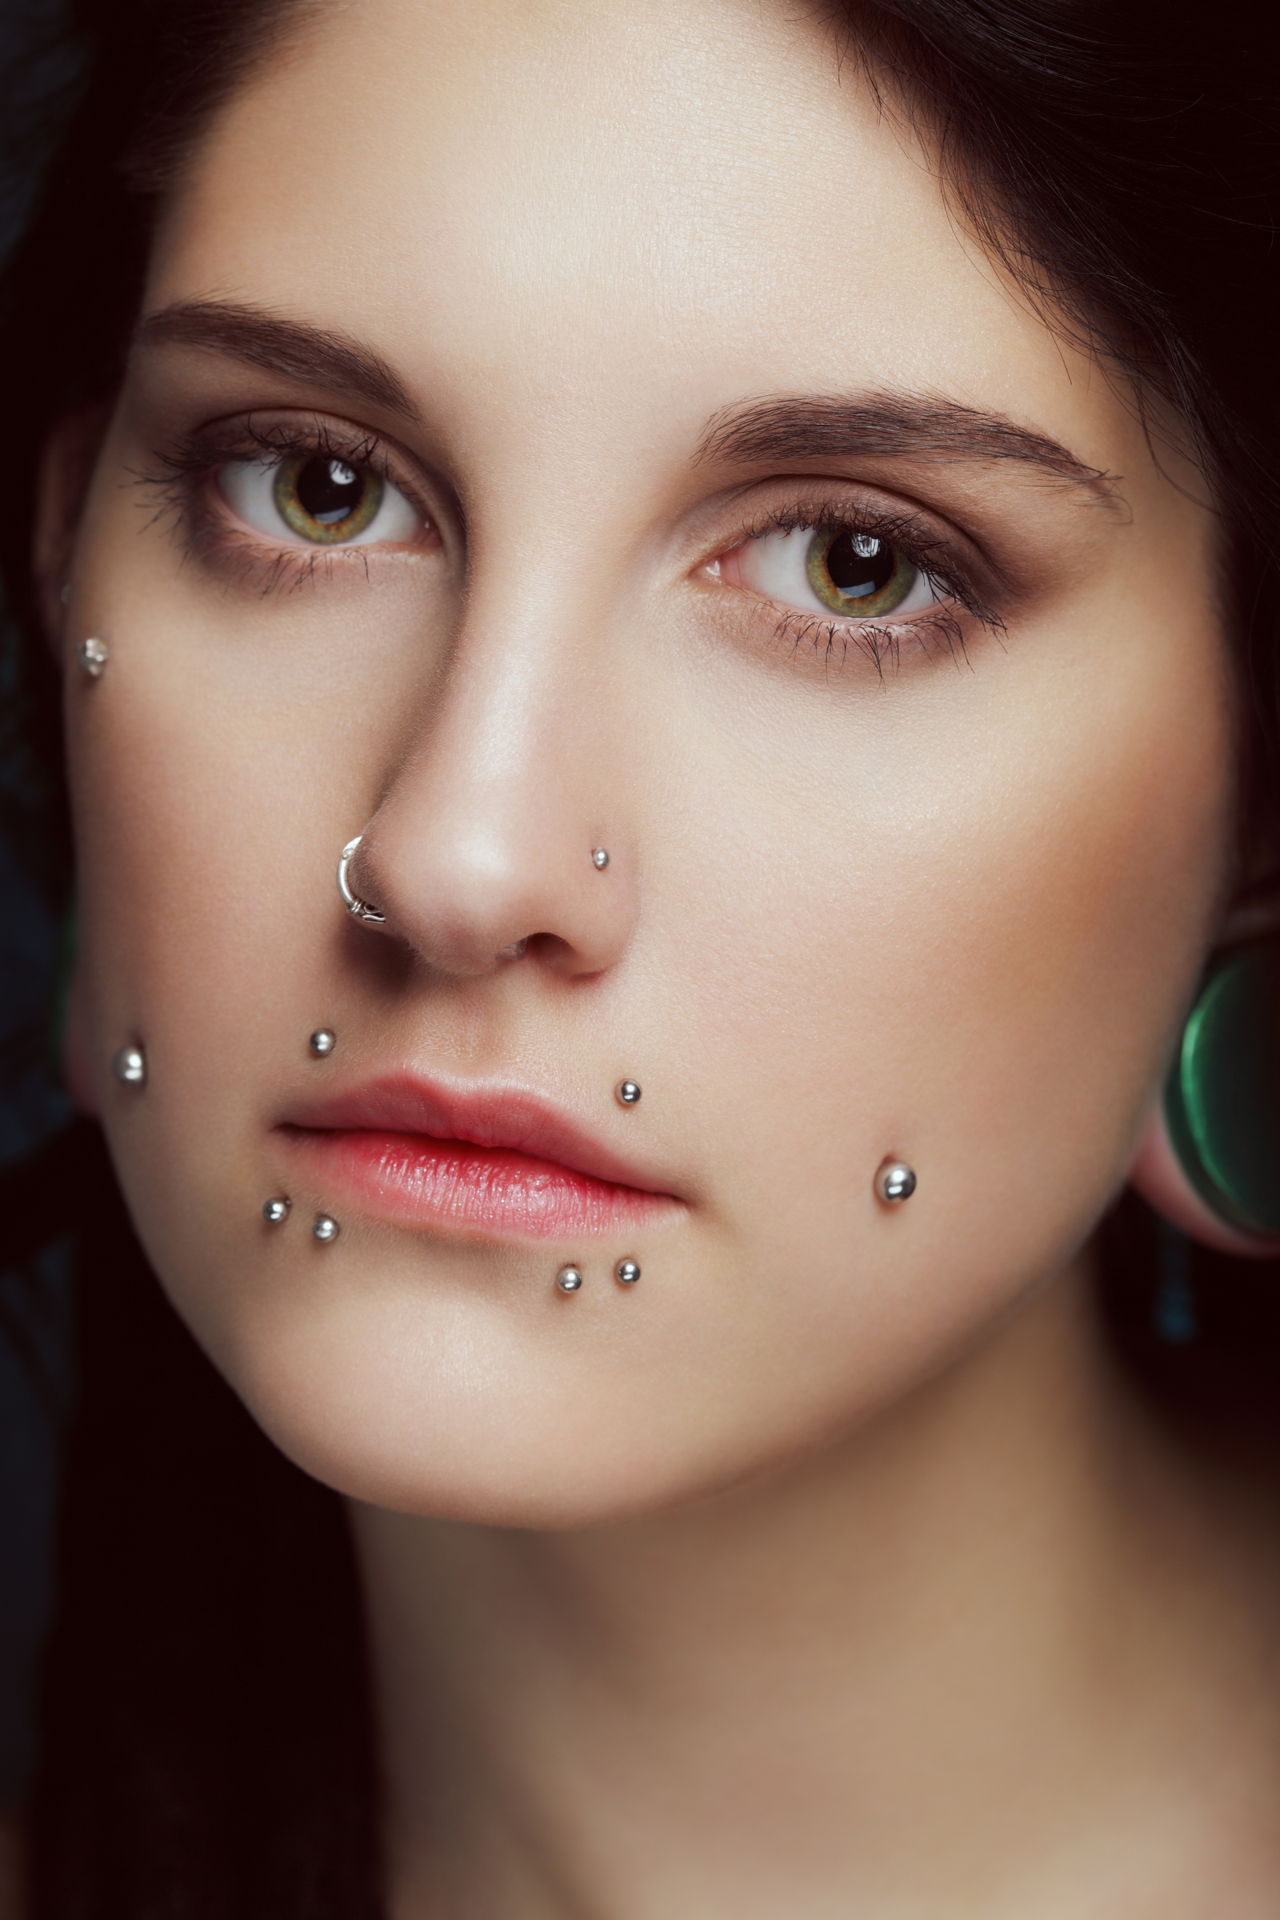 Sale Piercings All Over The Face In Stock